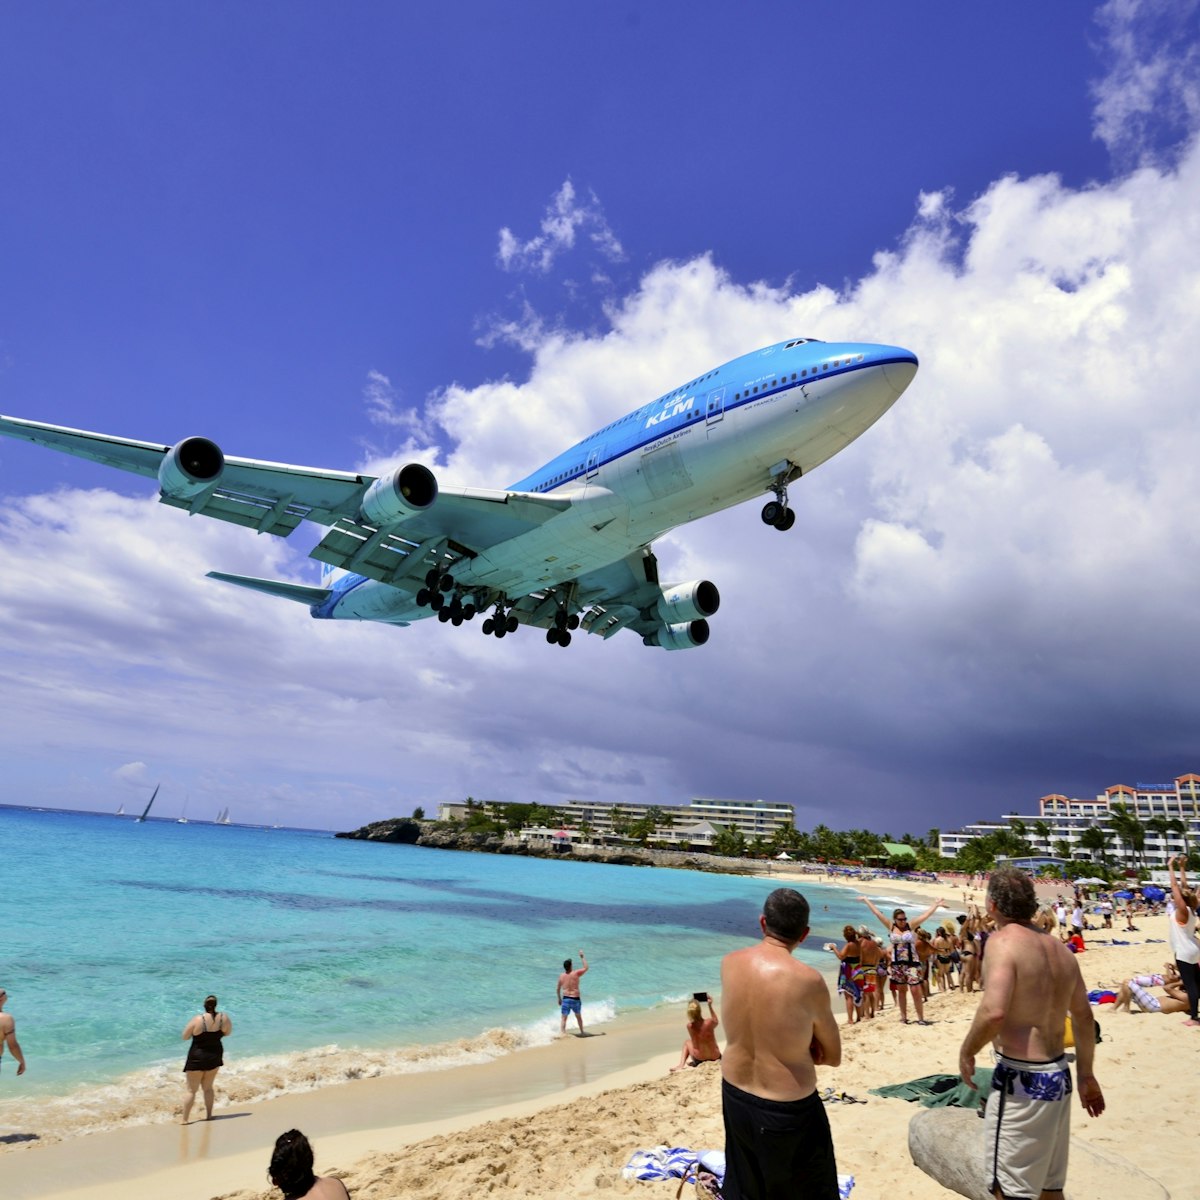 This is #1 in the series of 5 images of the granddaddy of the planes that land at the world famous Princess Juliana International Airport, the 747 KLM flight from Amsterdam.  The landing aircraft glide just feet above beach goers who come here to watch the planes land and takeoff from the airport.